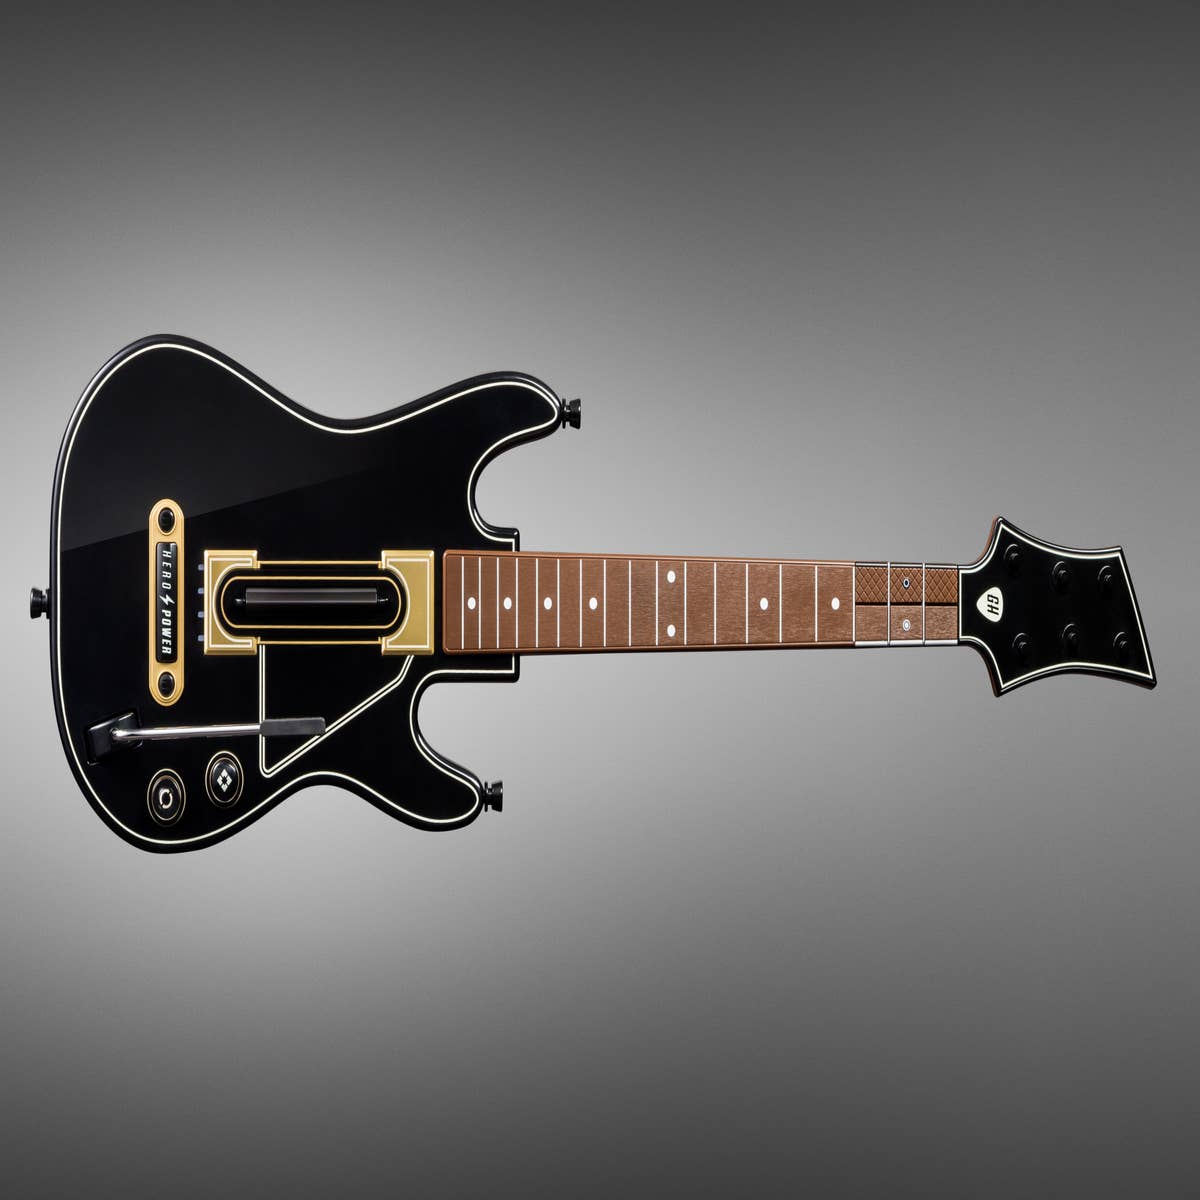 Guitar Hero Live is a first-person rock star simulator coming this